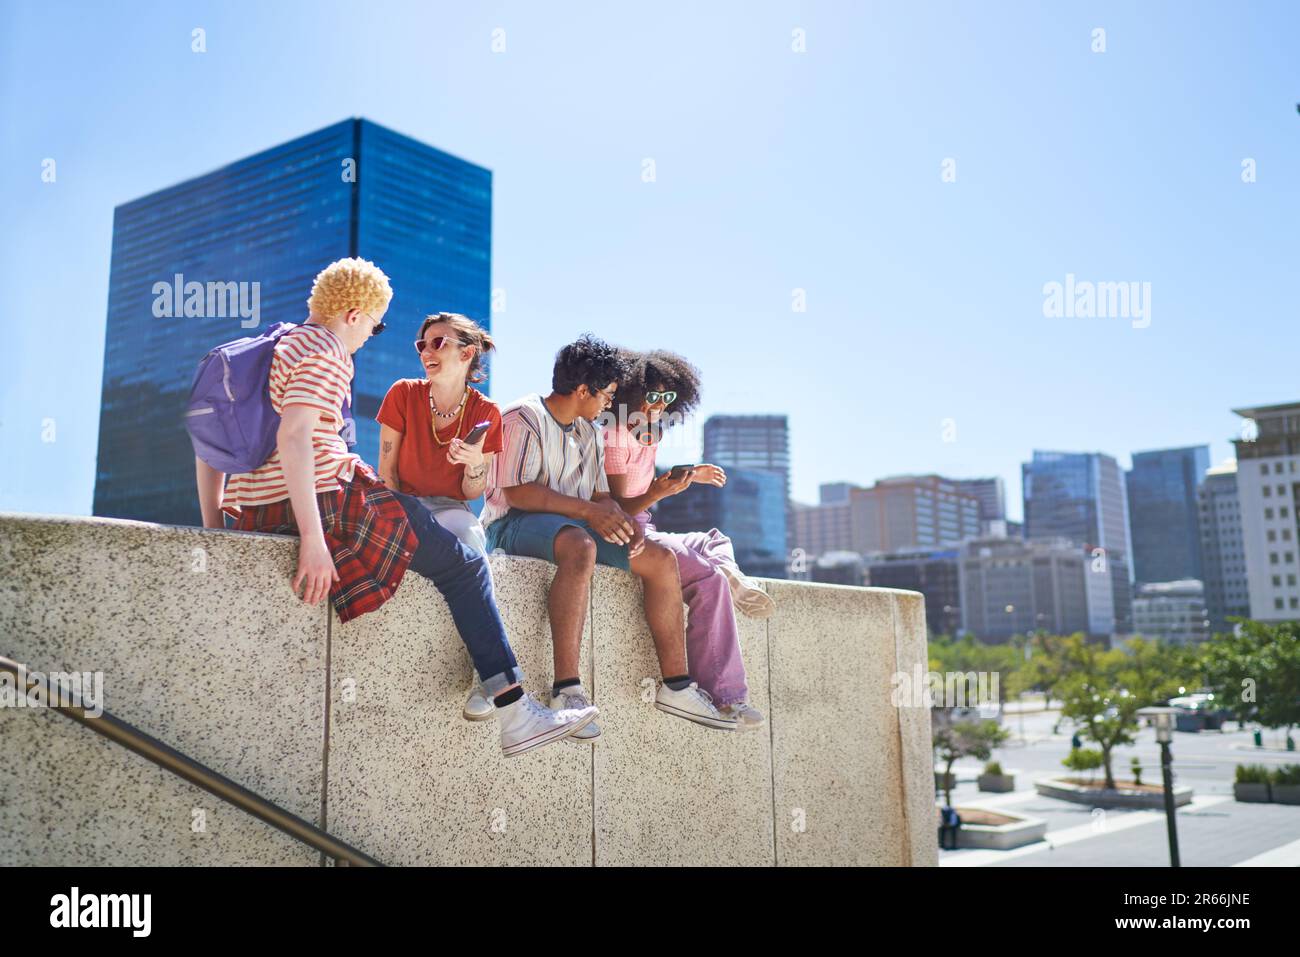 Young friends hanging out on ledge in sunny city Stock Photo